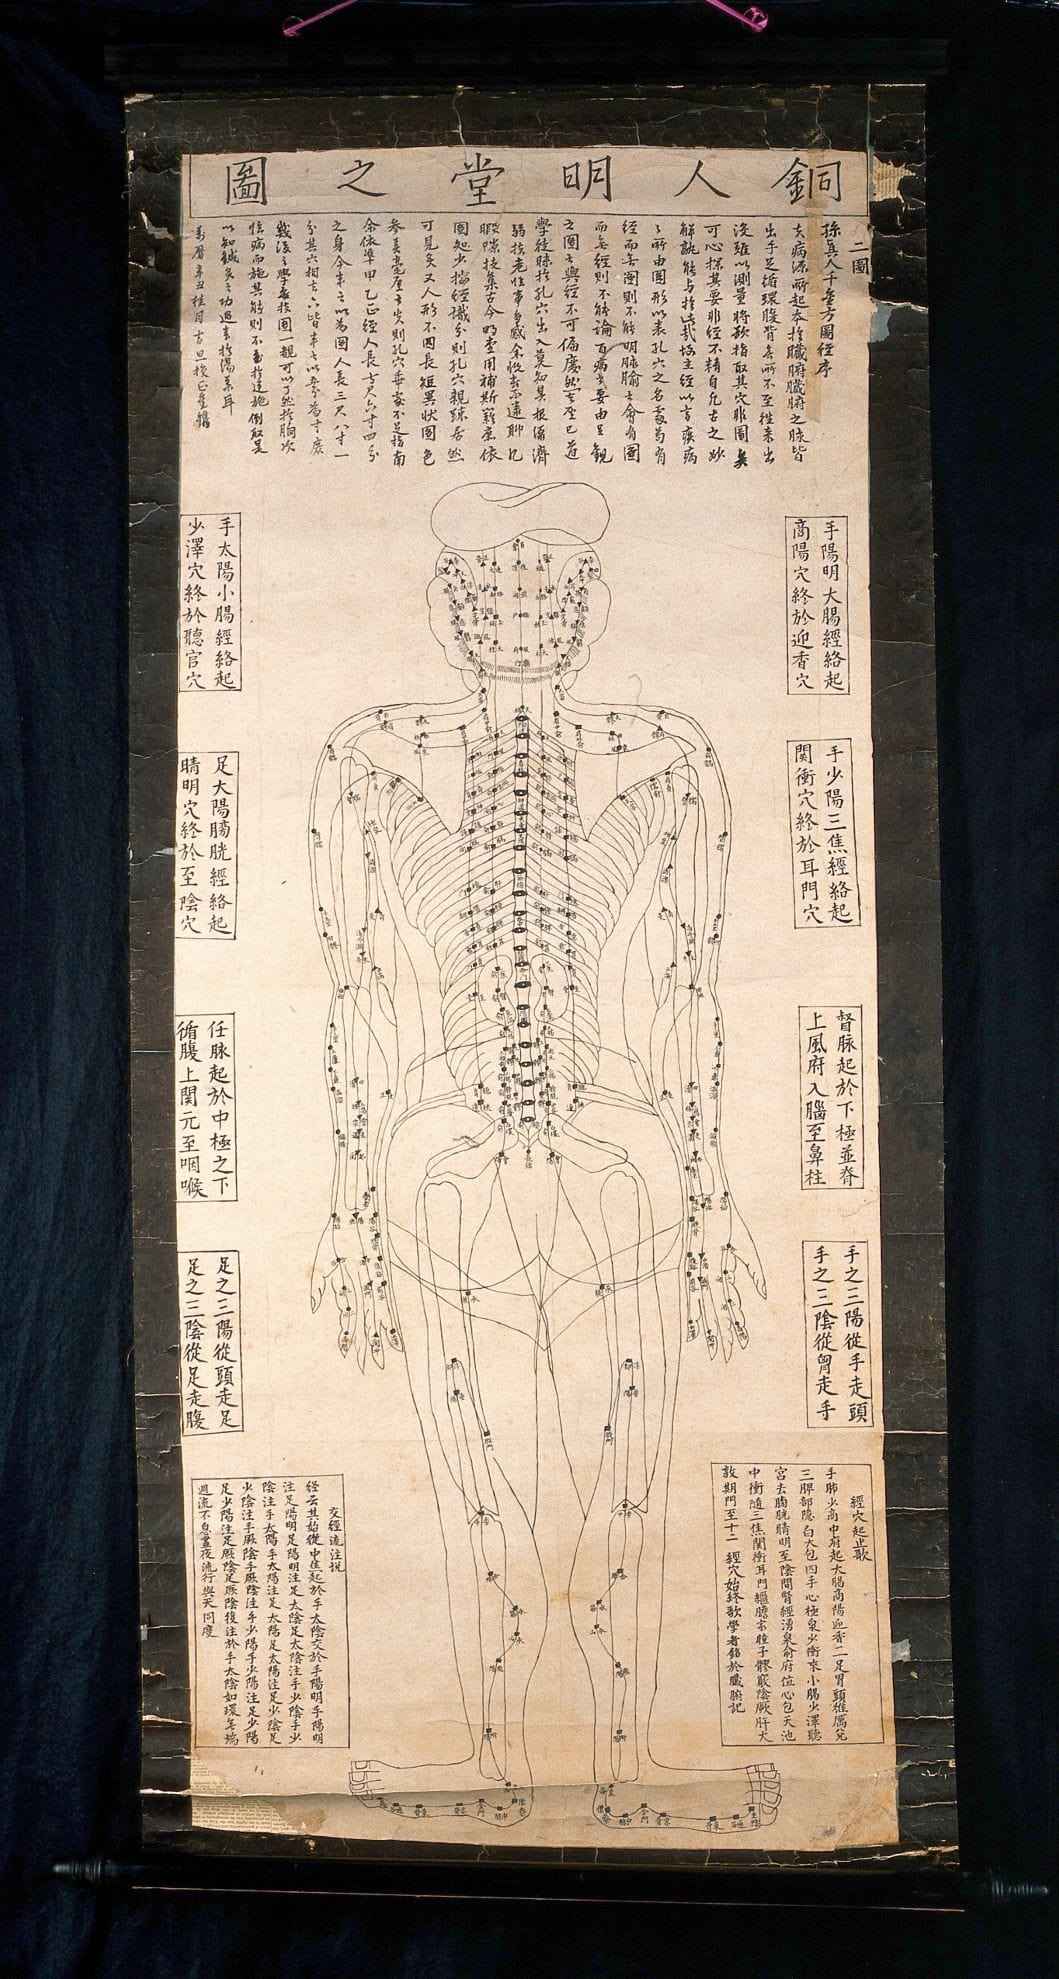 Chinese woodcut of acupuncture/pressure points on the back of the body (spinal pressure points). Source: https://www.lookandlearn.com/history-images/YW018314V/Acupuncturepressure-points-on-the-back-of-the-body-spinal-pressure-points?t=2&q=Acupuncture&n=71